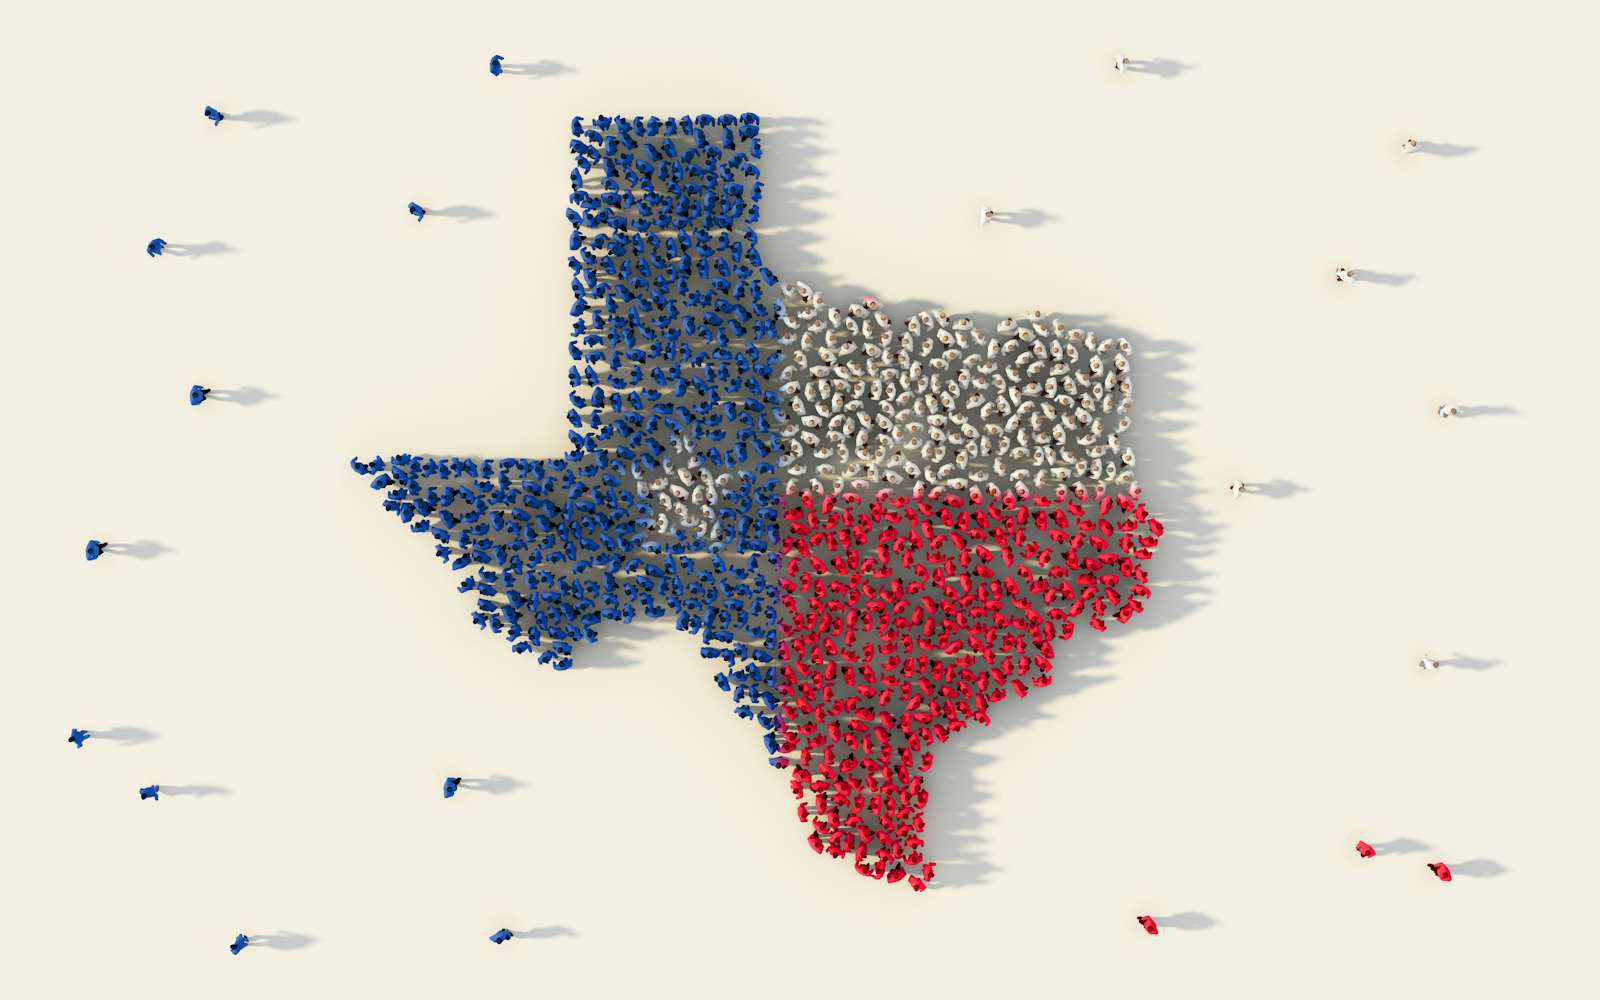 Large group of people forming Texas flag map